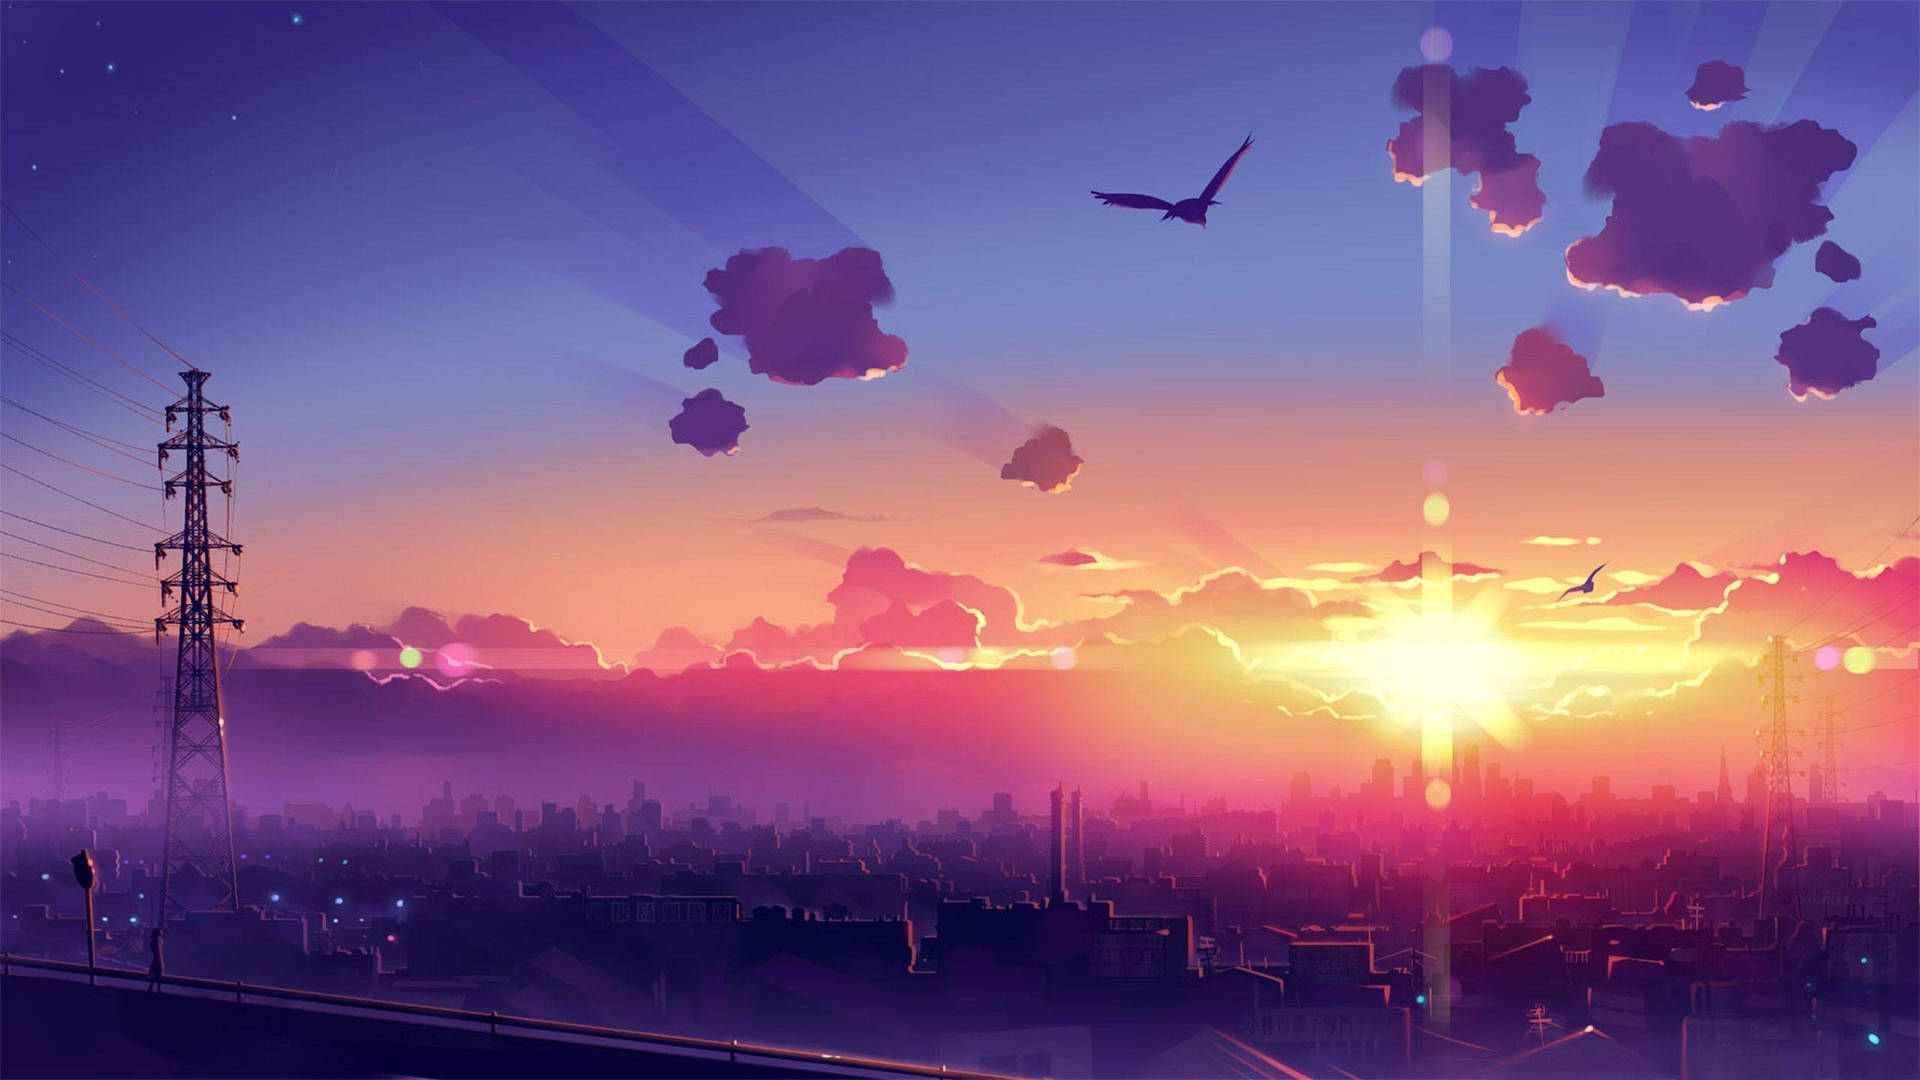 Sunset Over The City Aesthetic Anime Scenery Background